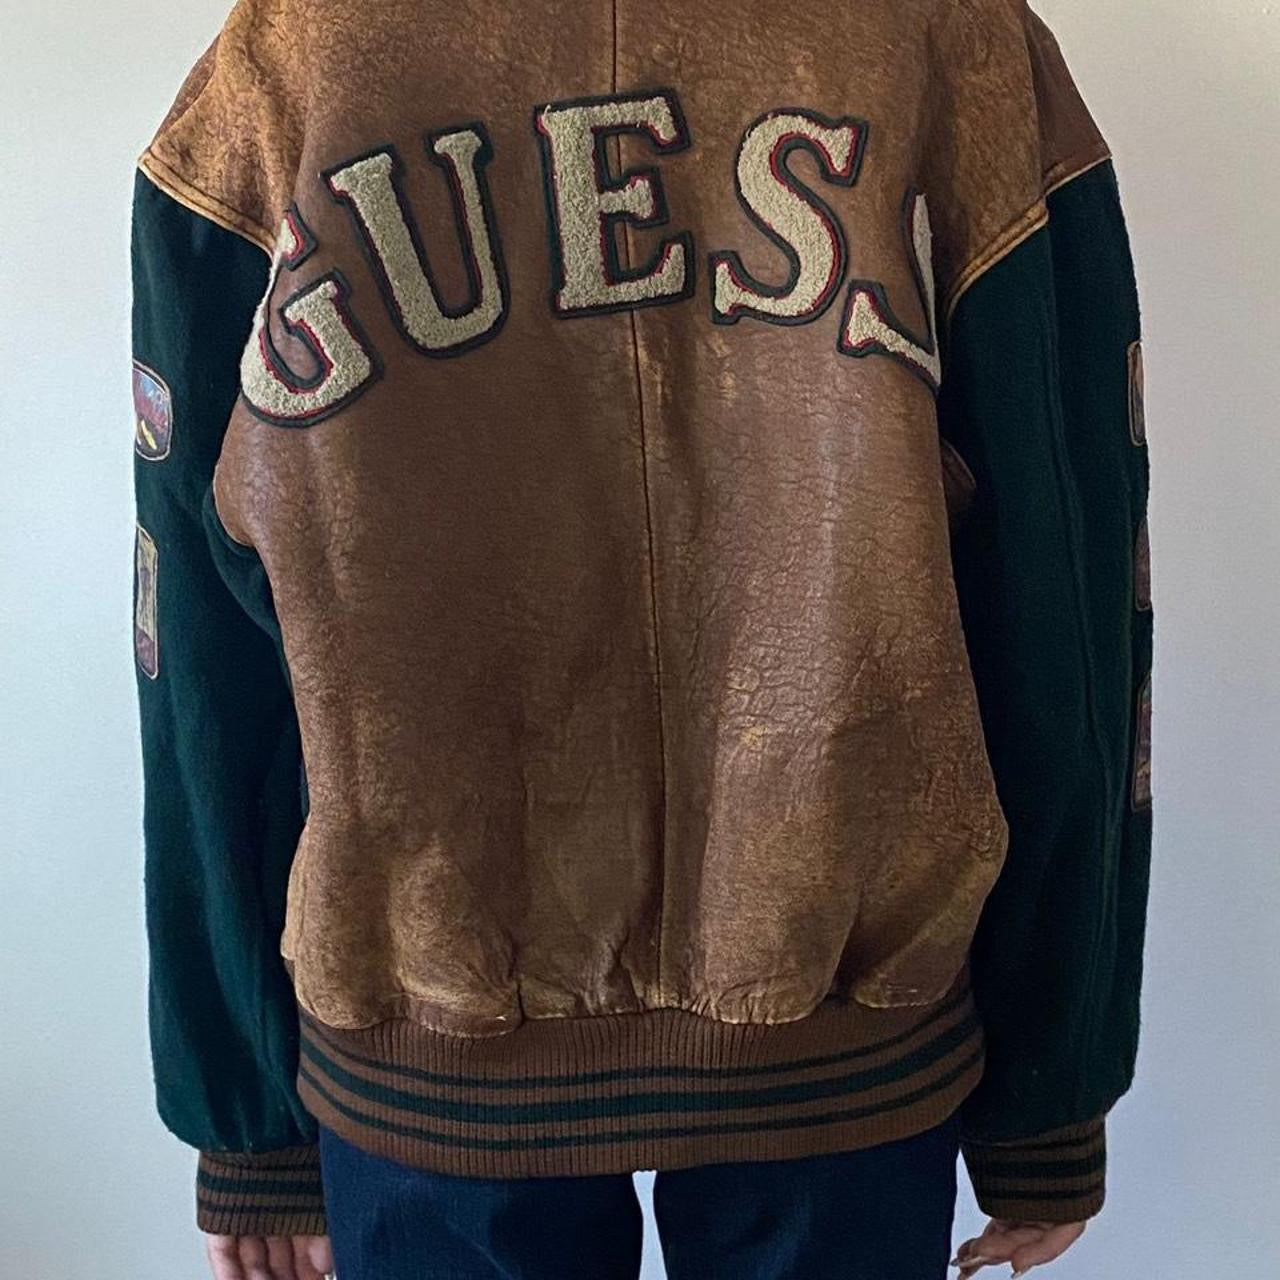 Vintage 90s Guess leather jacket